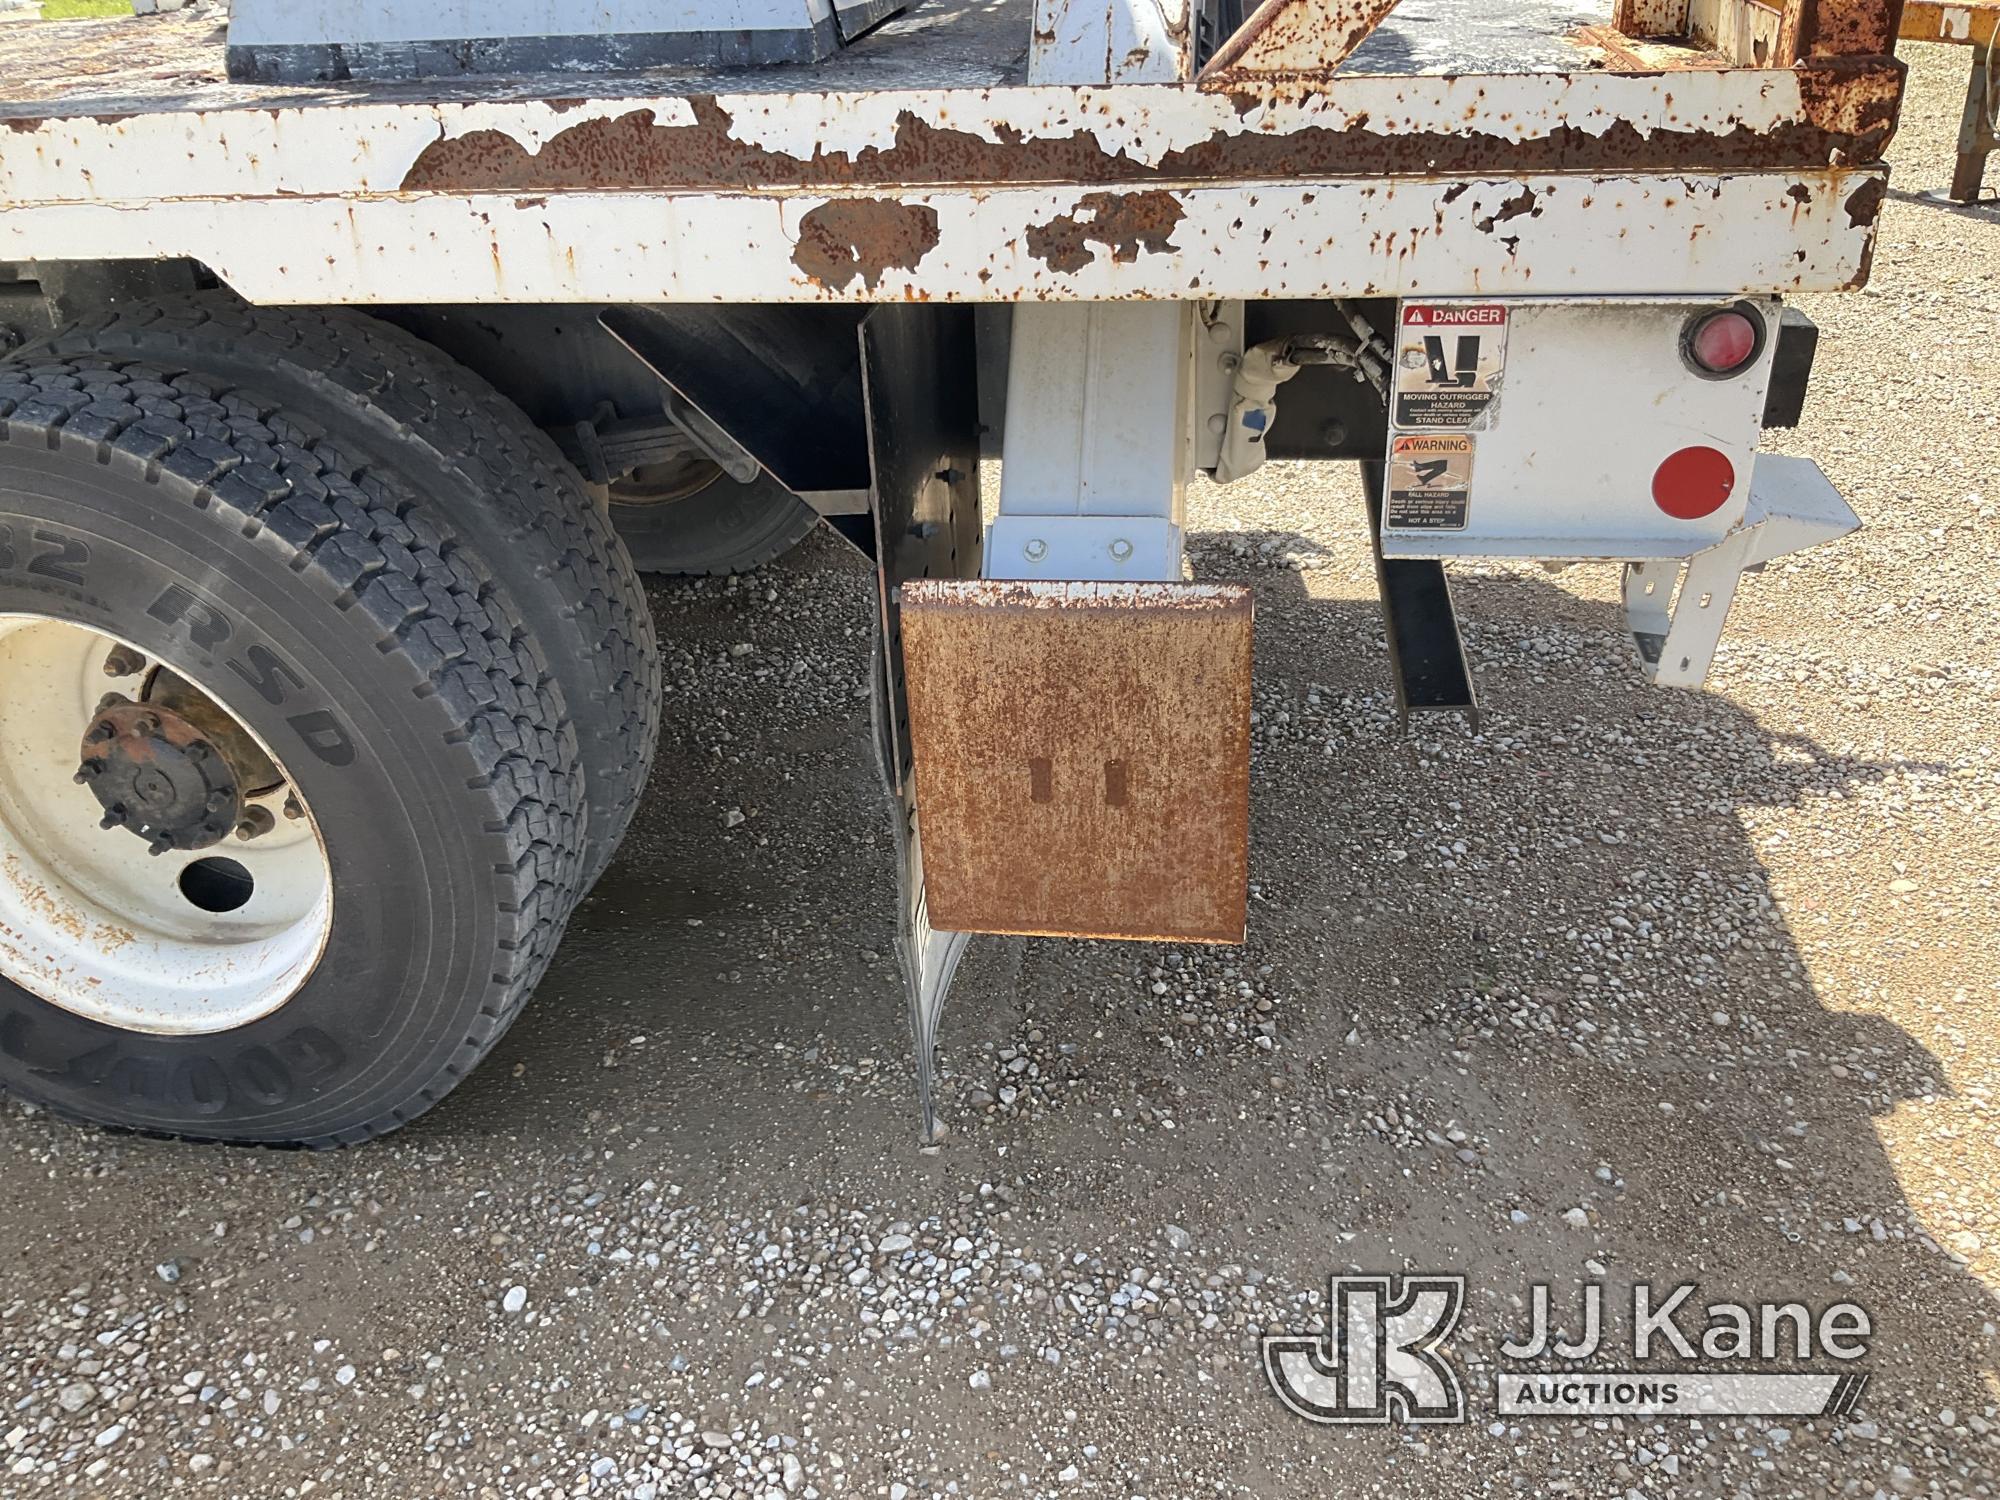 (Waxahachie, TX) Altec DC47-TR, Digger Derrick rear mounted on 2015 Ford F750 Flatbed/Utility Truck